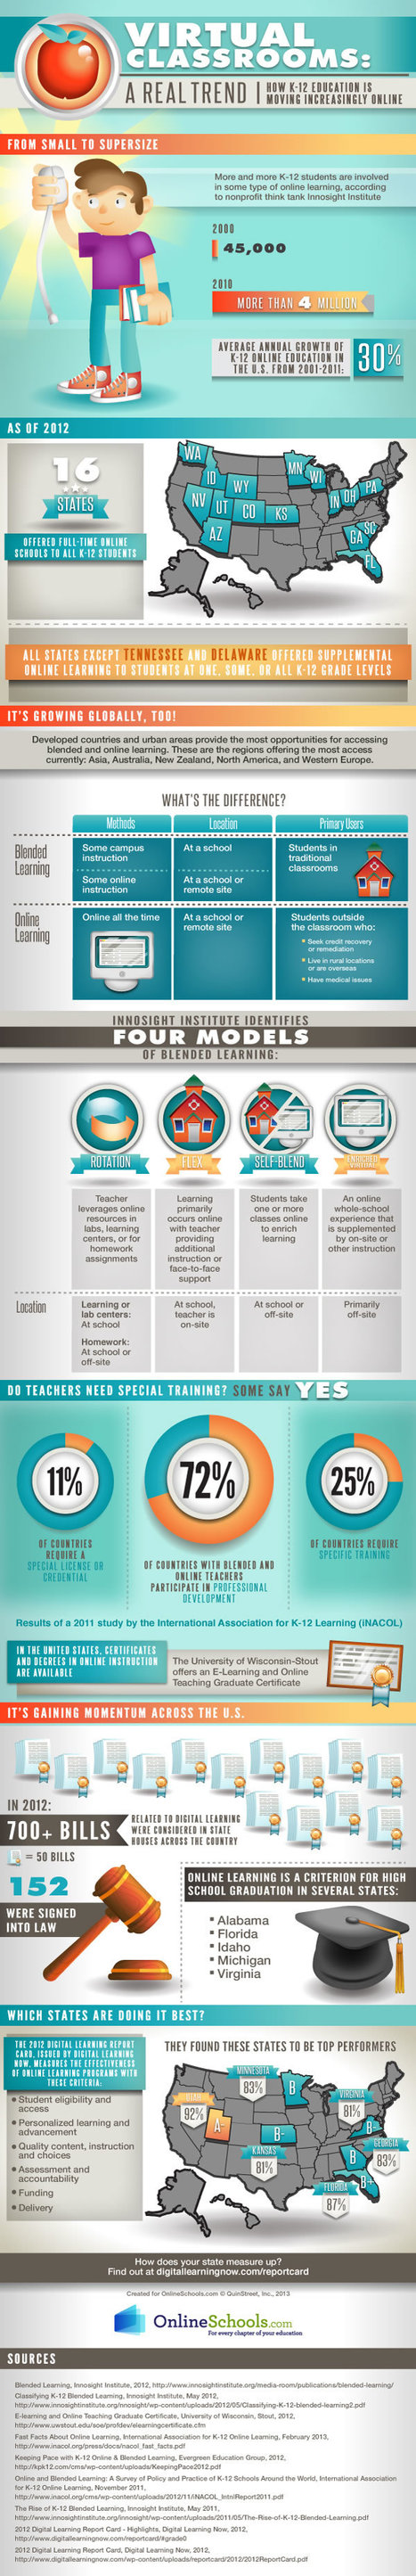 The Teacher's Quick Guide To Blended Learning | Time to Learn | Scoop.it